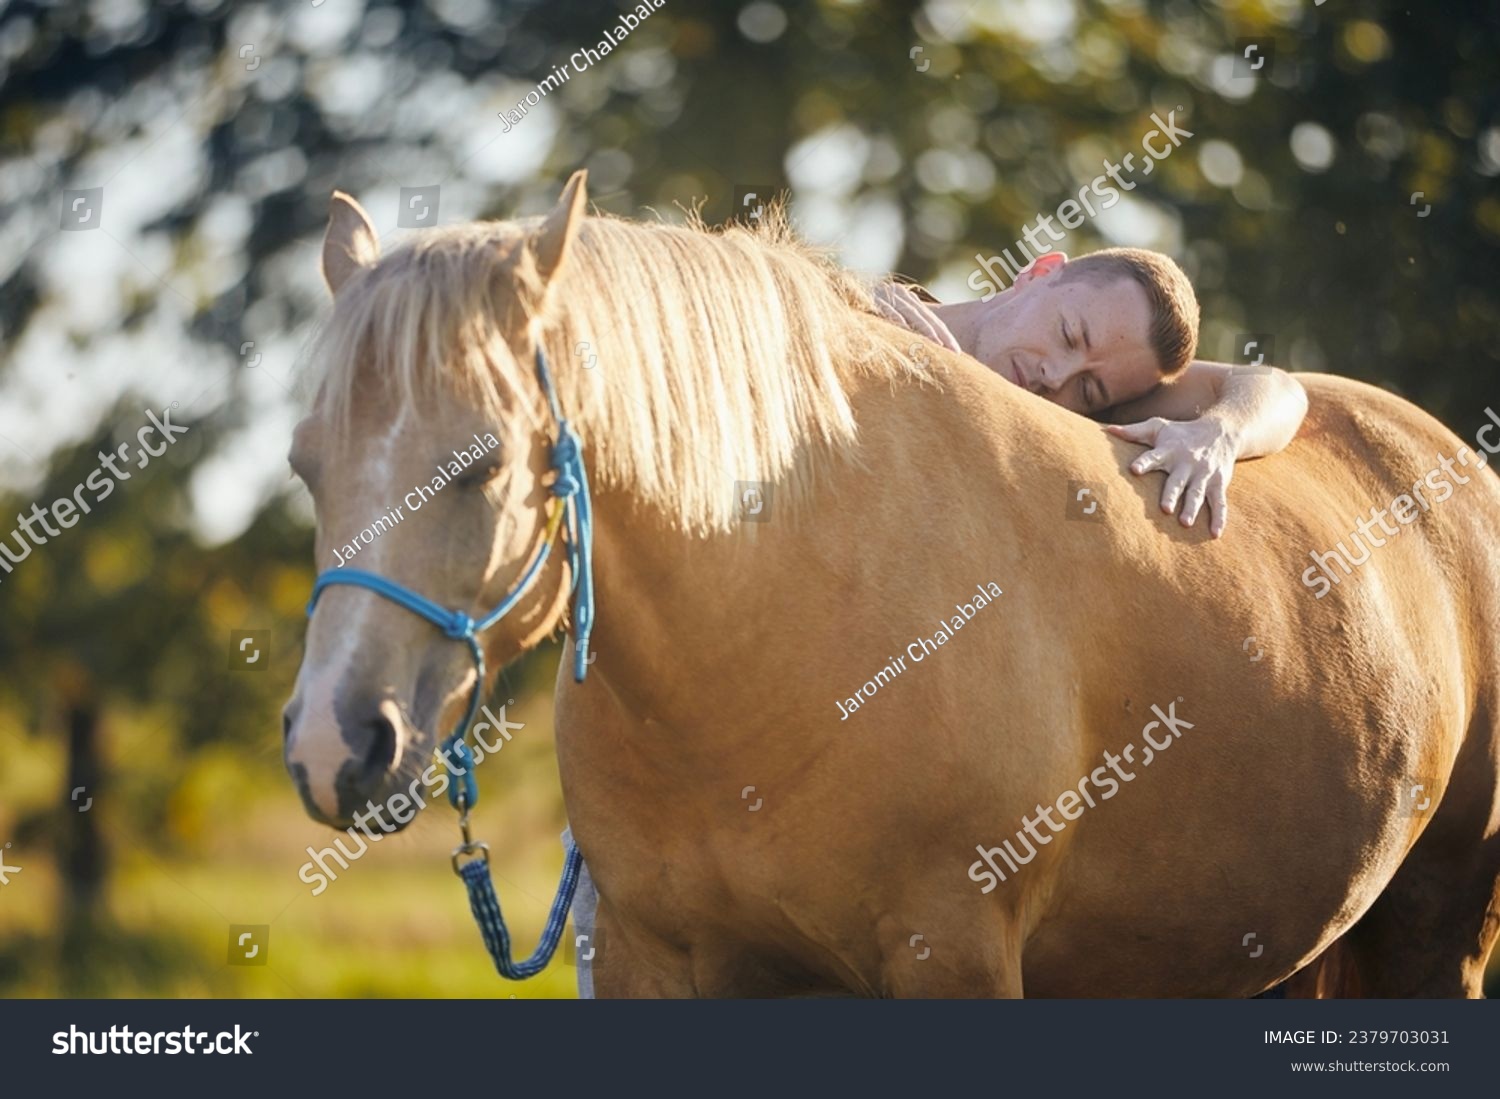 Man lying embracing of therapy horse. Themes hippotherapy, care and friendship between people and animals.
 #2379703031